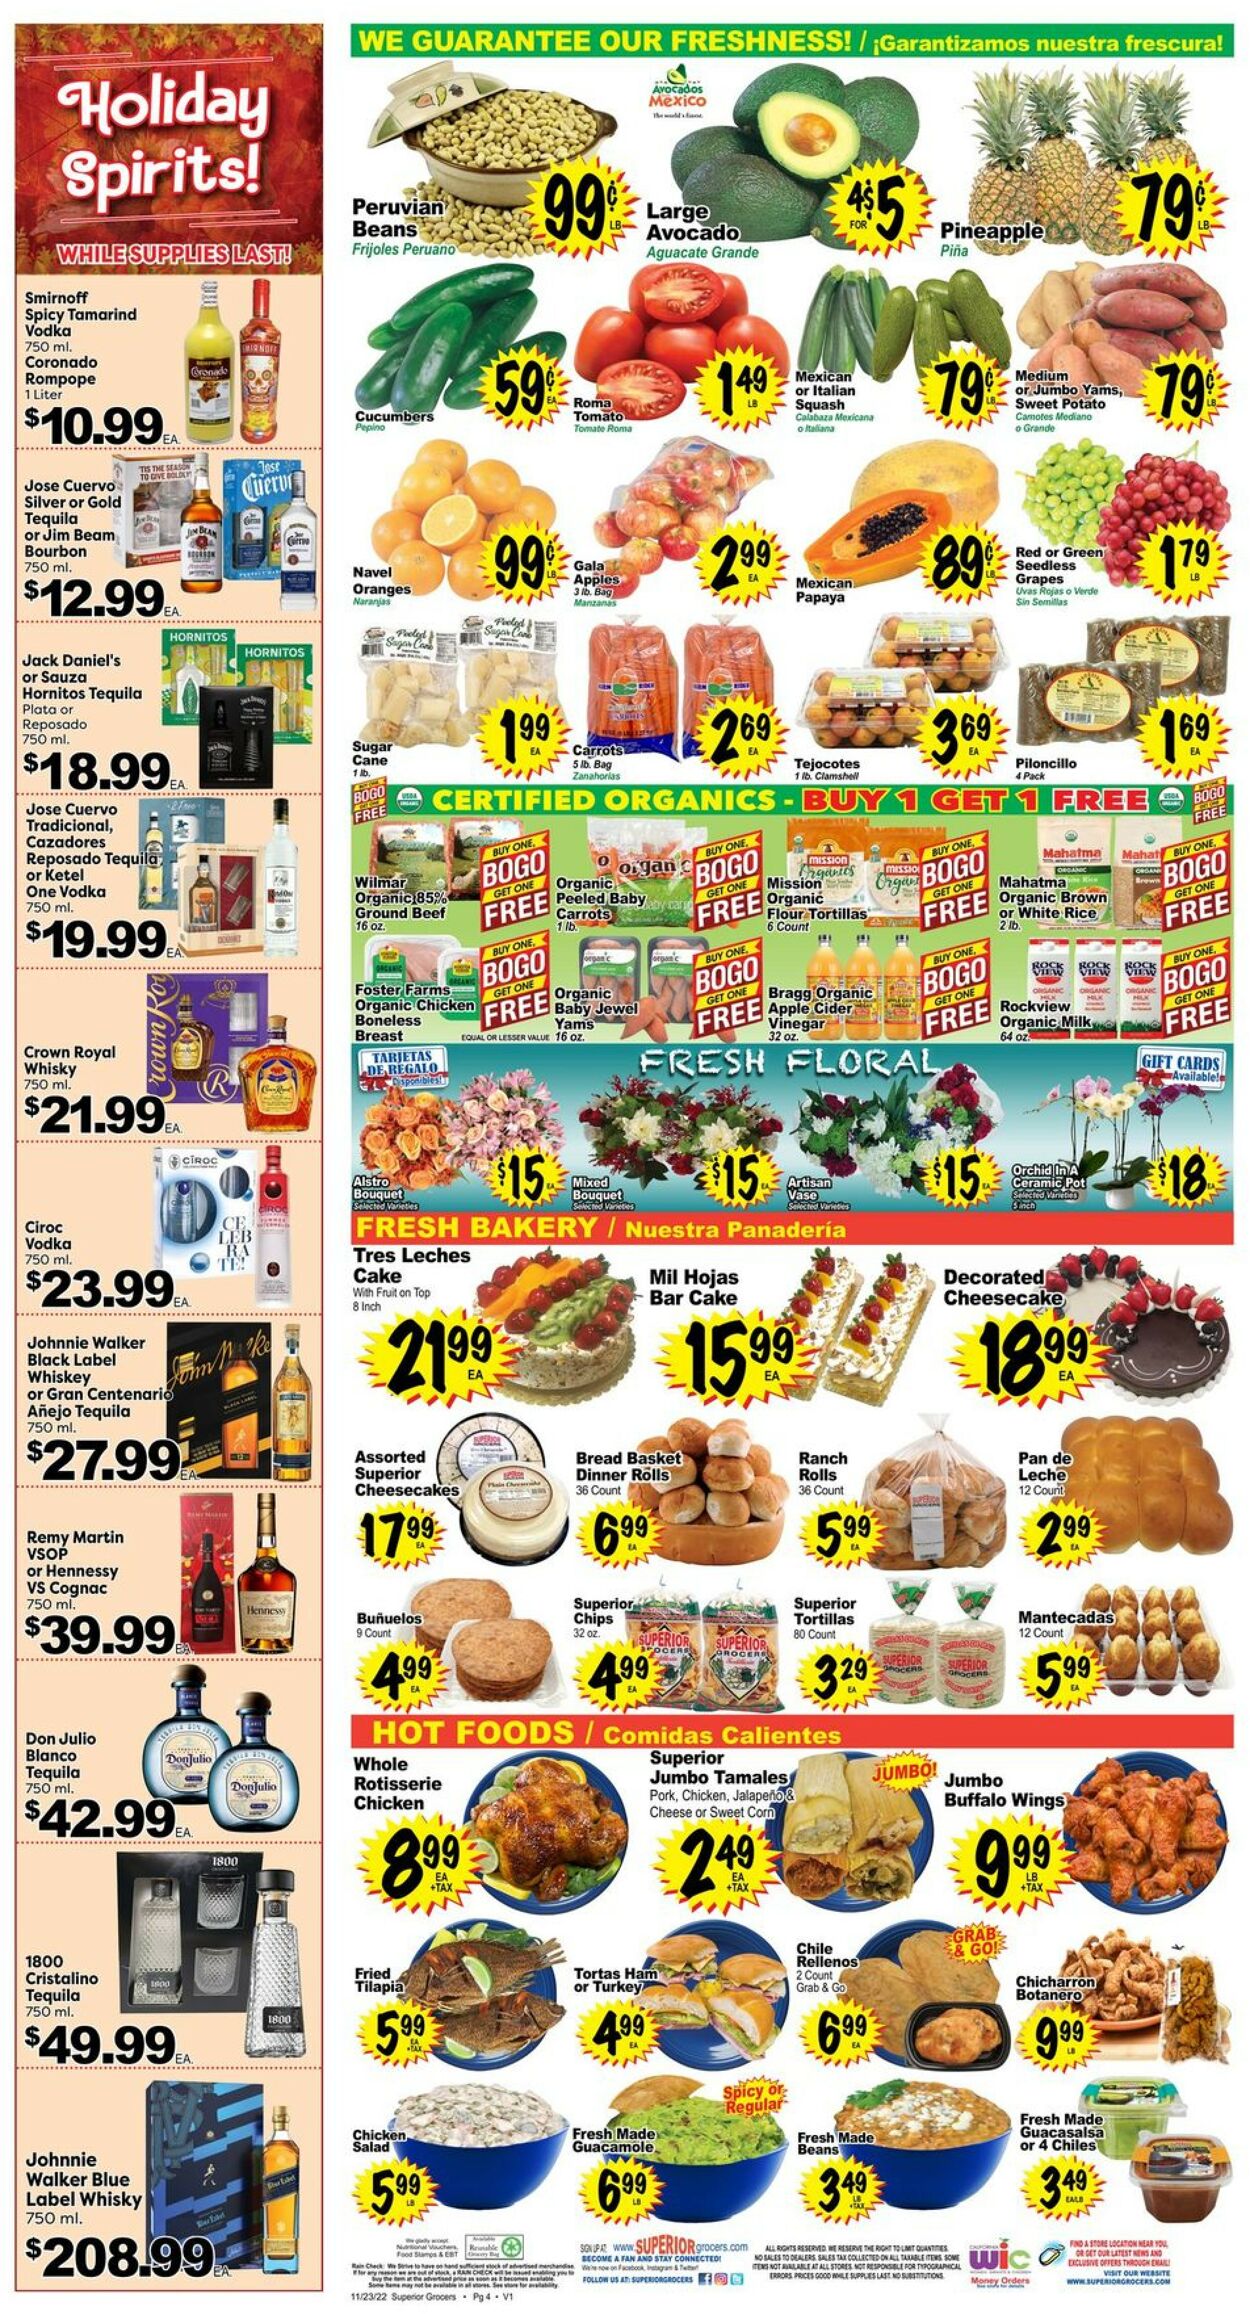 Catalogue Superior Grocers from 11/23/2022